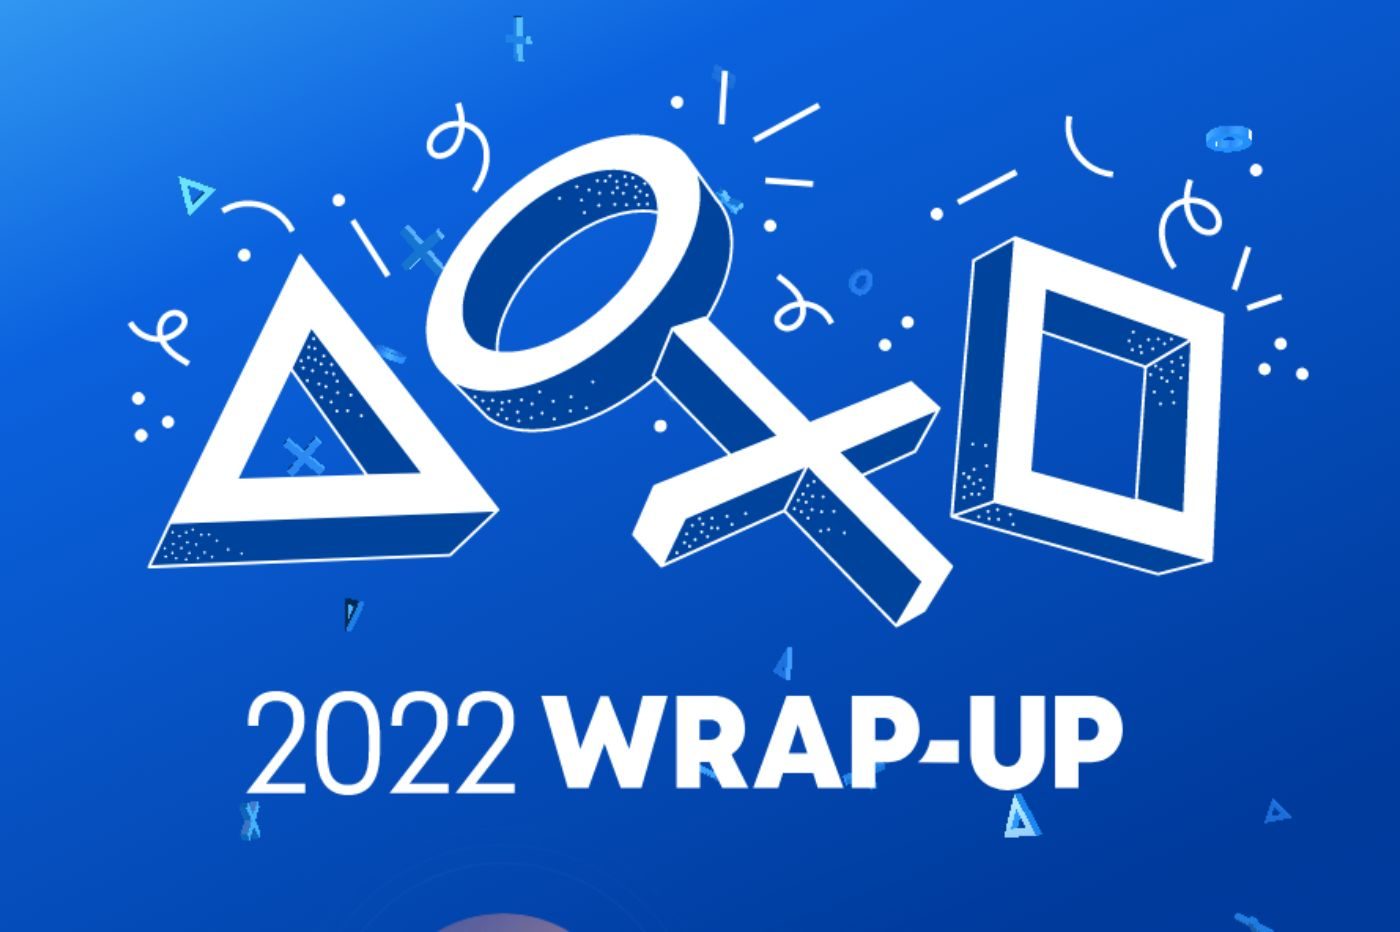 Playstation wrap up 2022